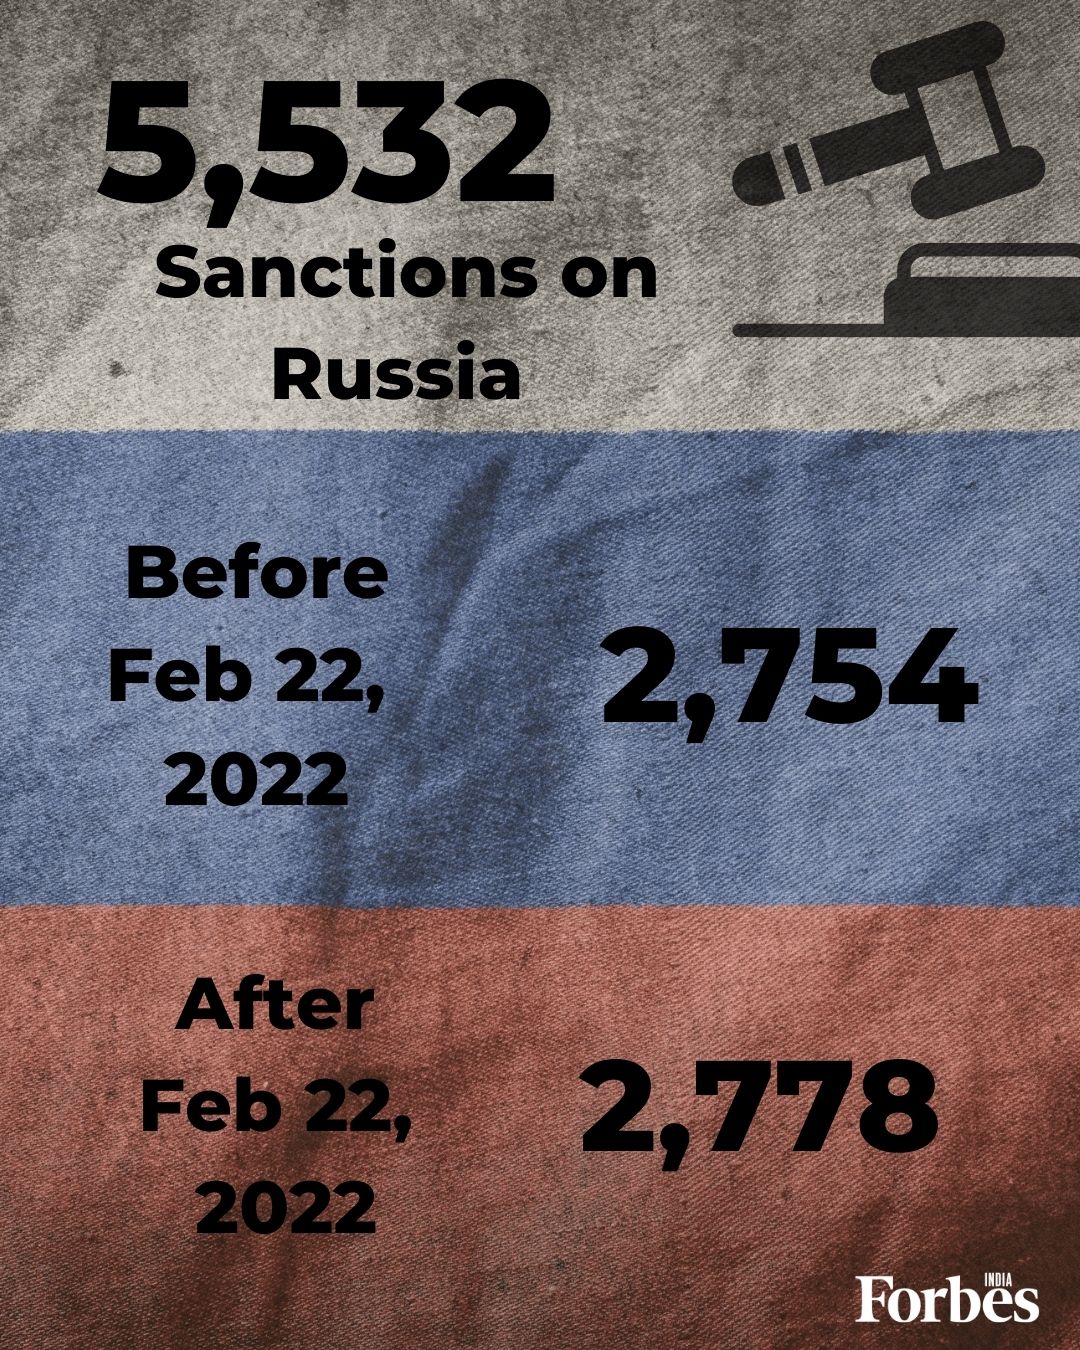 Russia is now the most sanctioned country in the world